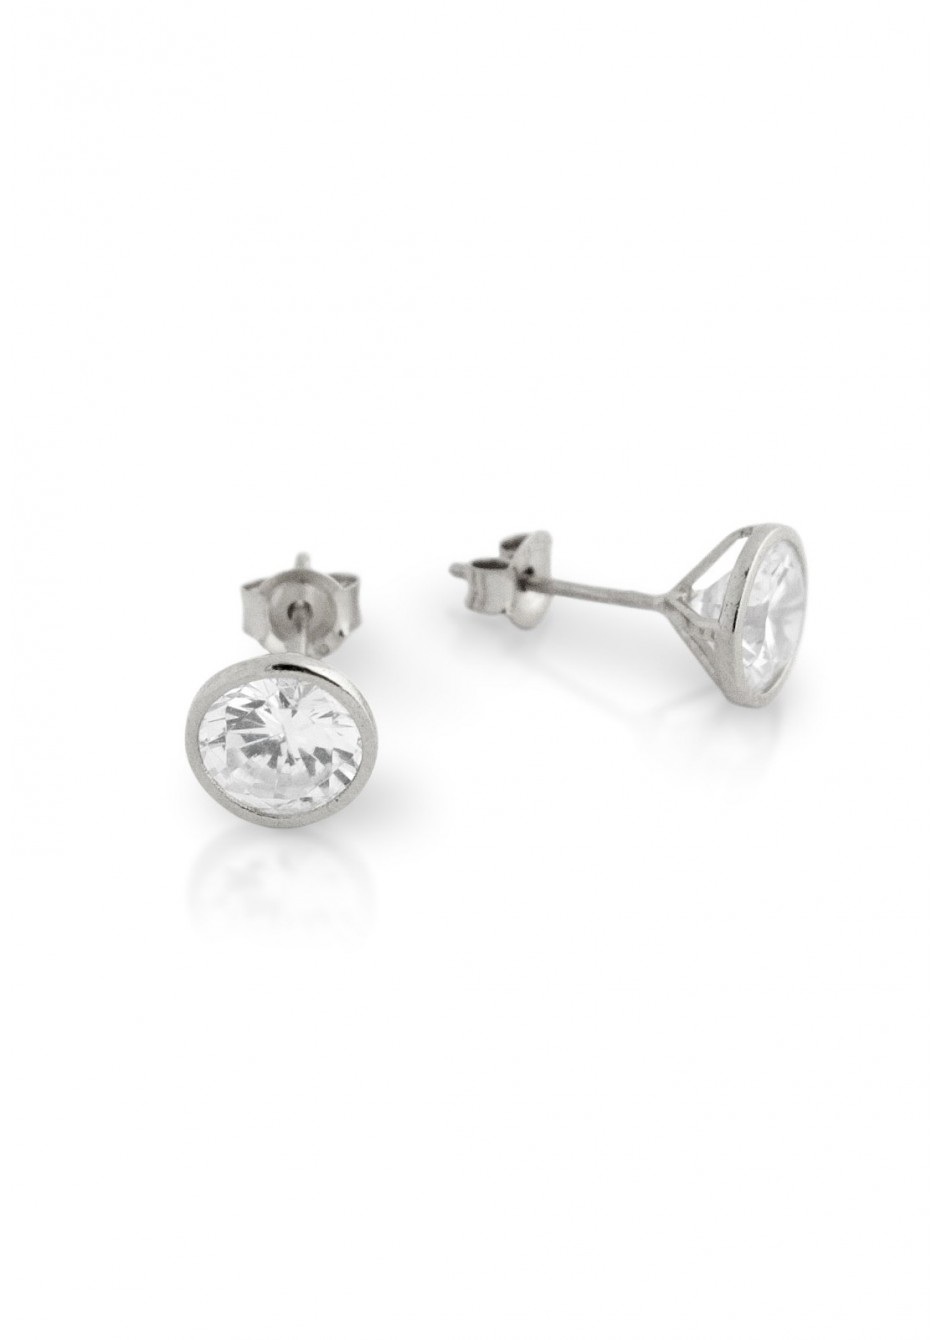 Picture   Alexi London Alexi London Maxi Solitaire Stud Earrings in Silver